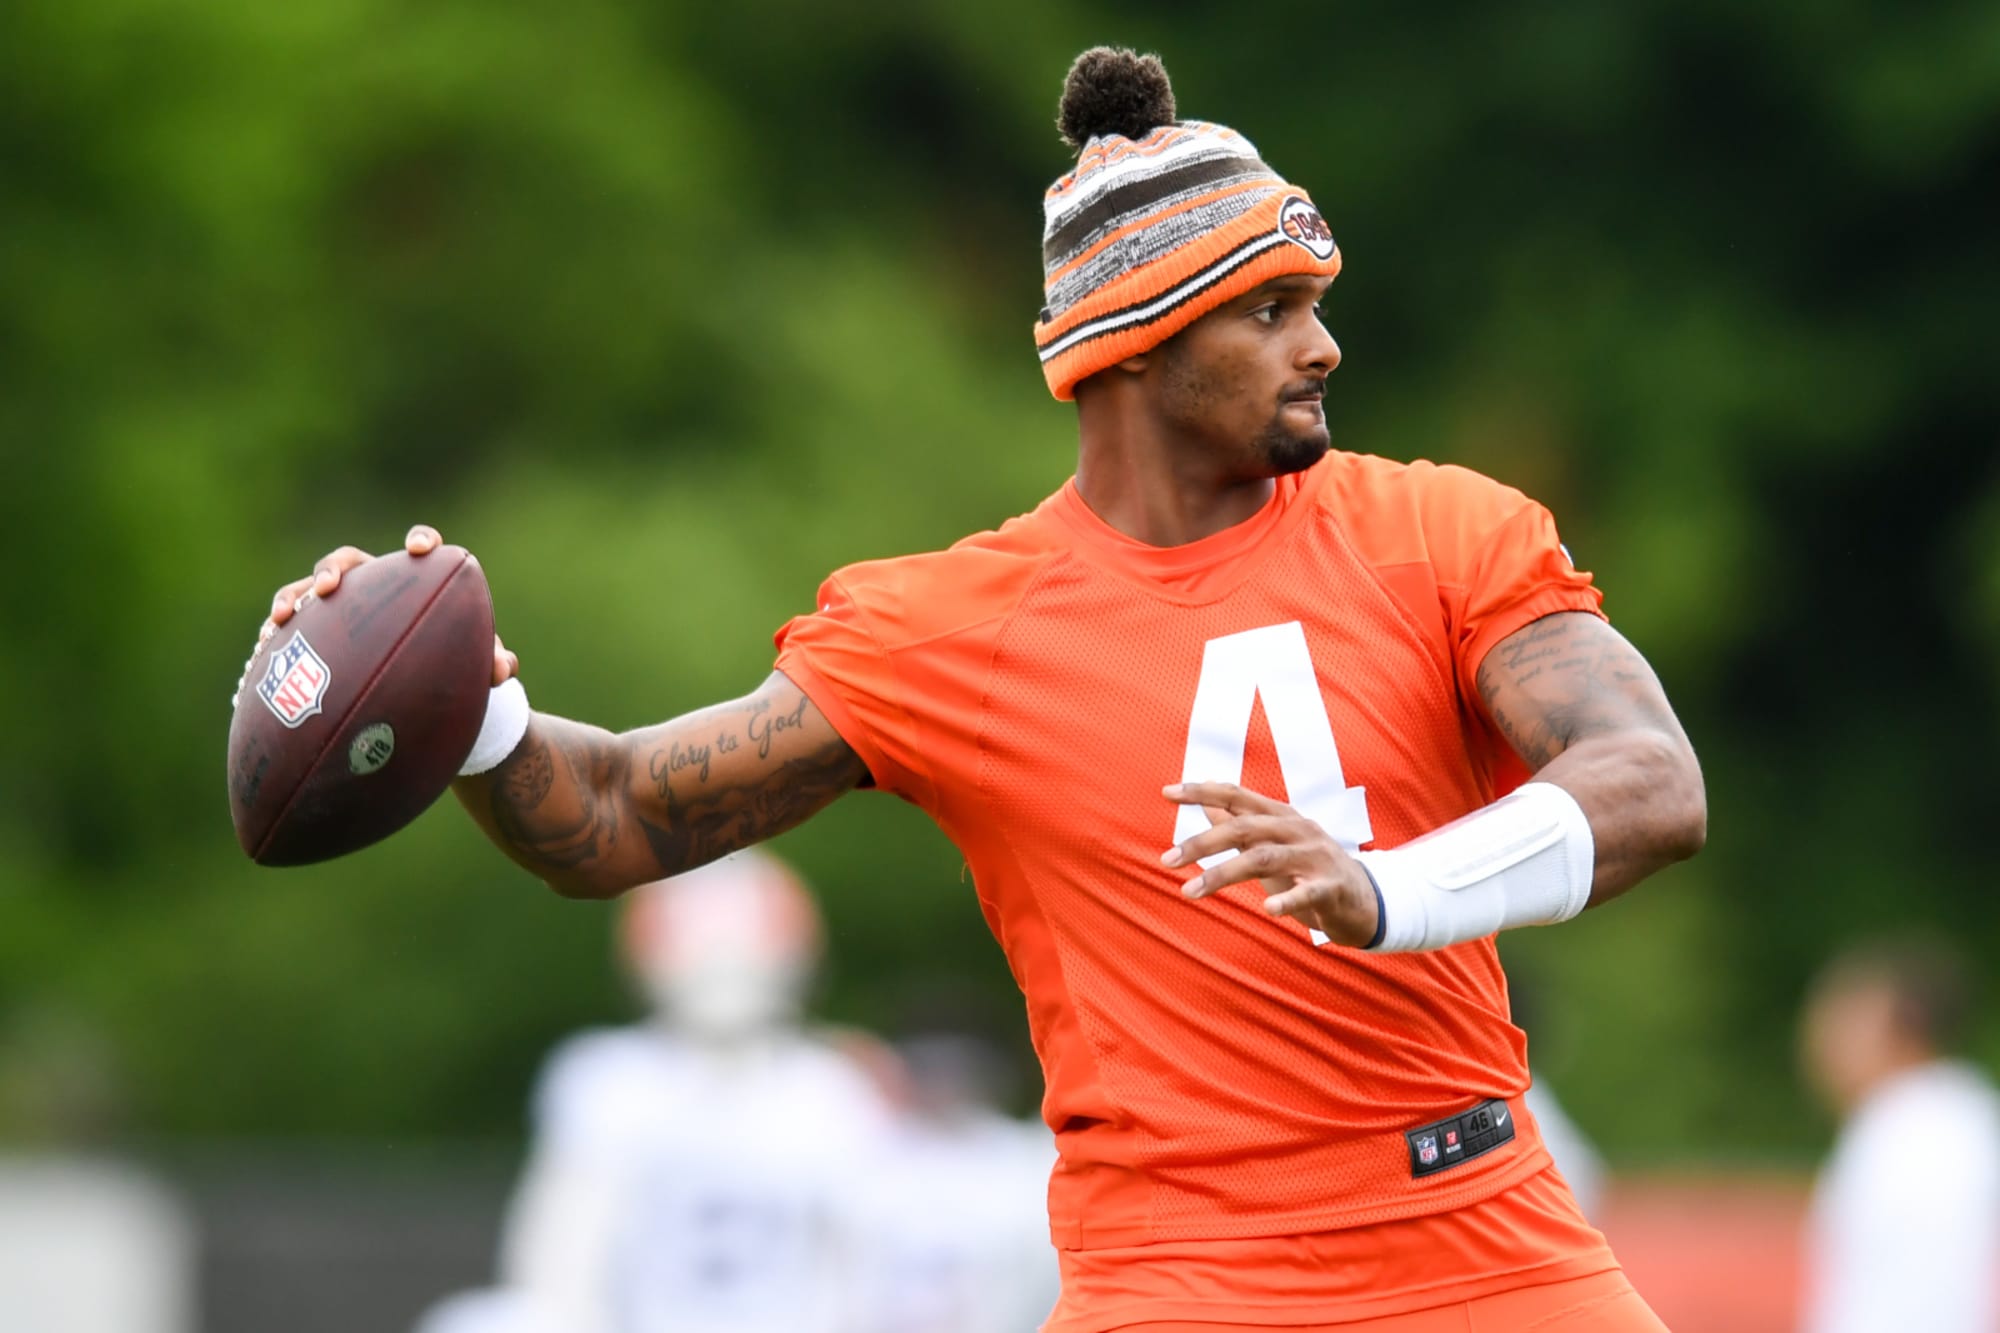 Ravens officially set to play Deshaun Watson and the Browns in 2022